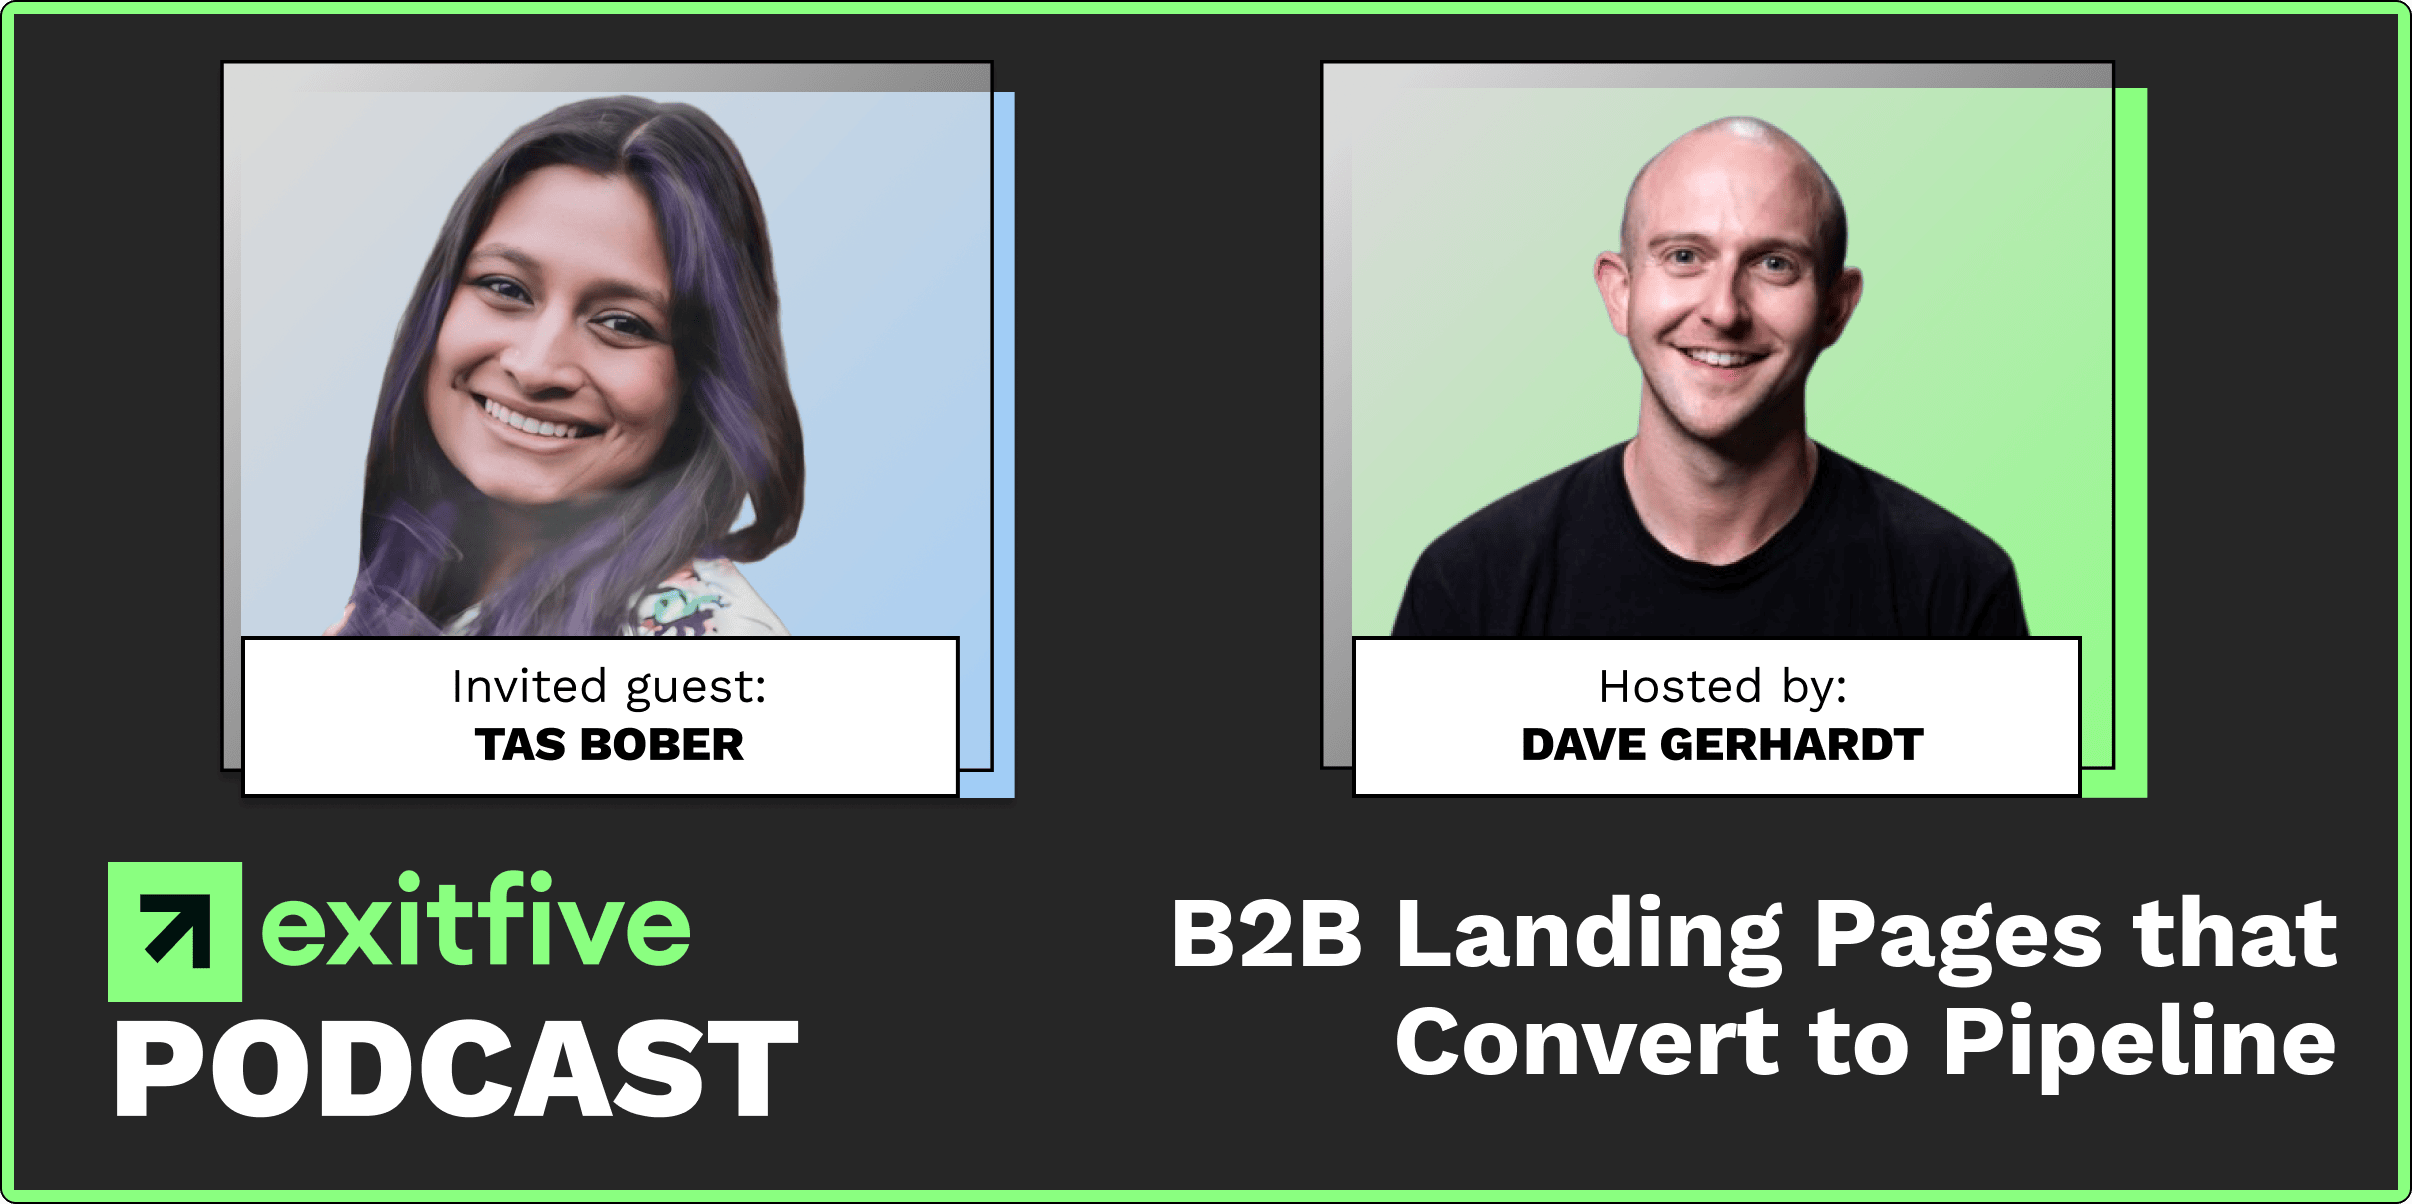 Content | B2B Landing Pages that Convert to Pipeline (and How You Should Actually Be Using Attribution) with Tas Bober